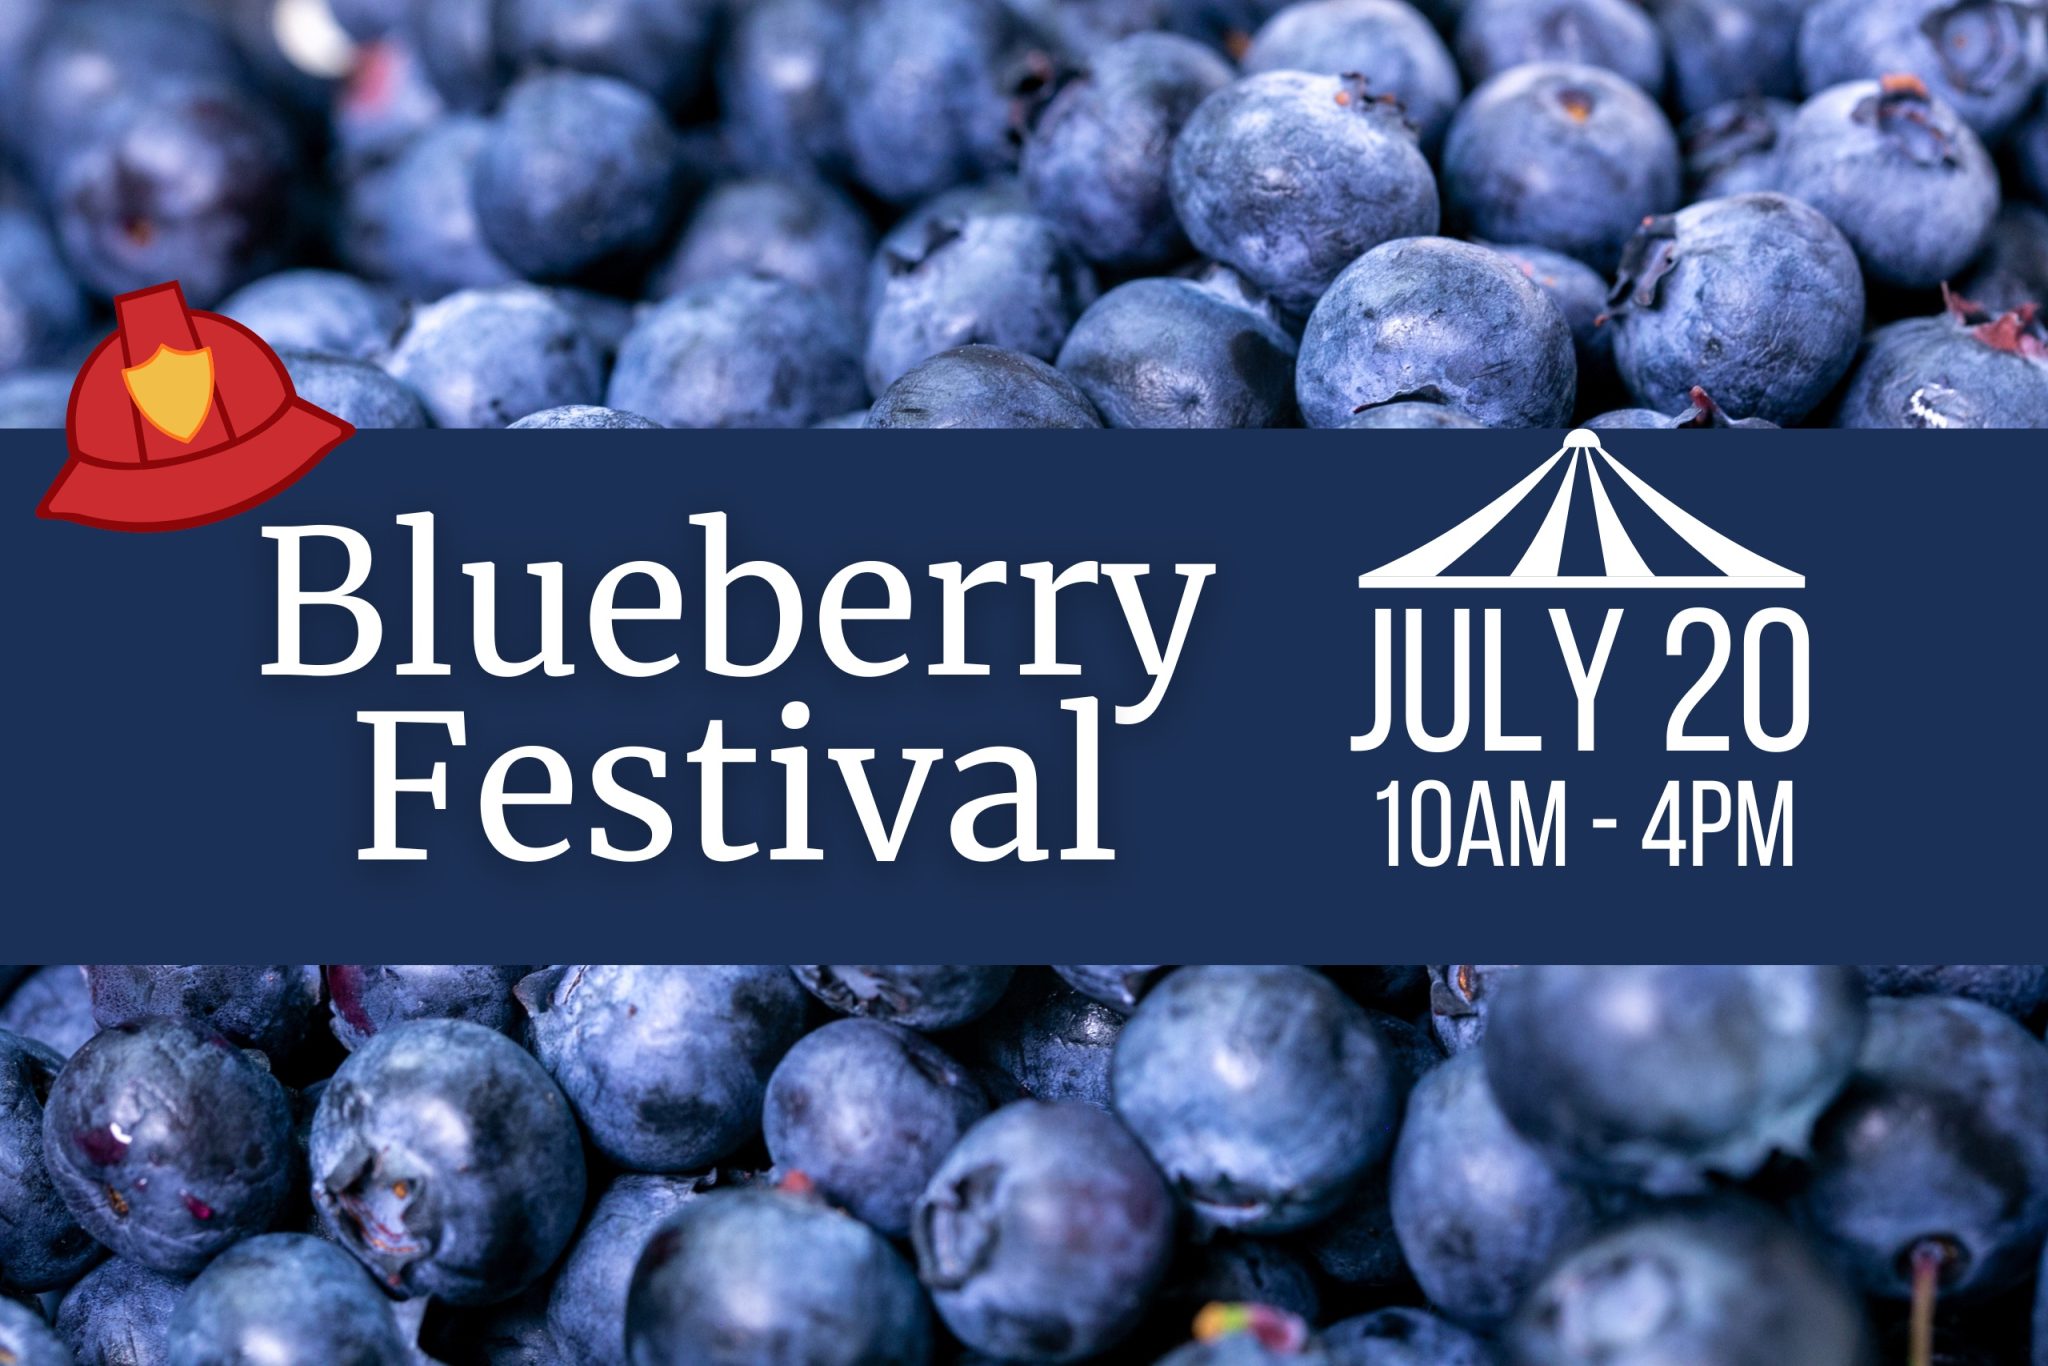 The Annual Lyman Orchards Blueberry Festival